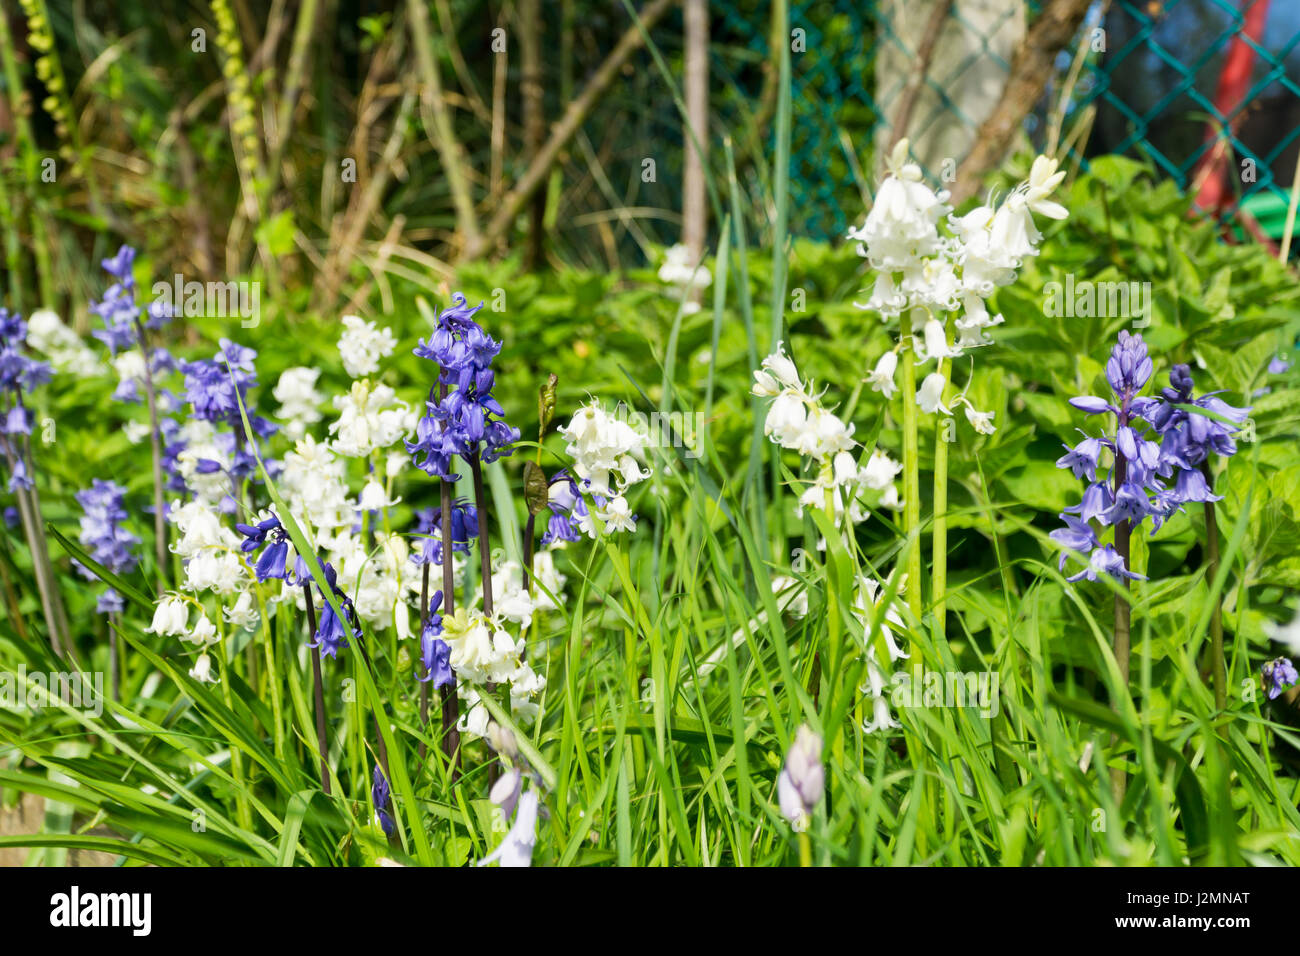 Blue & white bell flowers amongst the grass in a garden Stock Photo